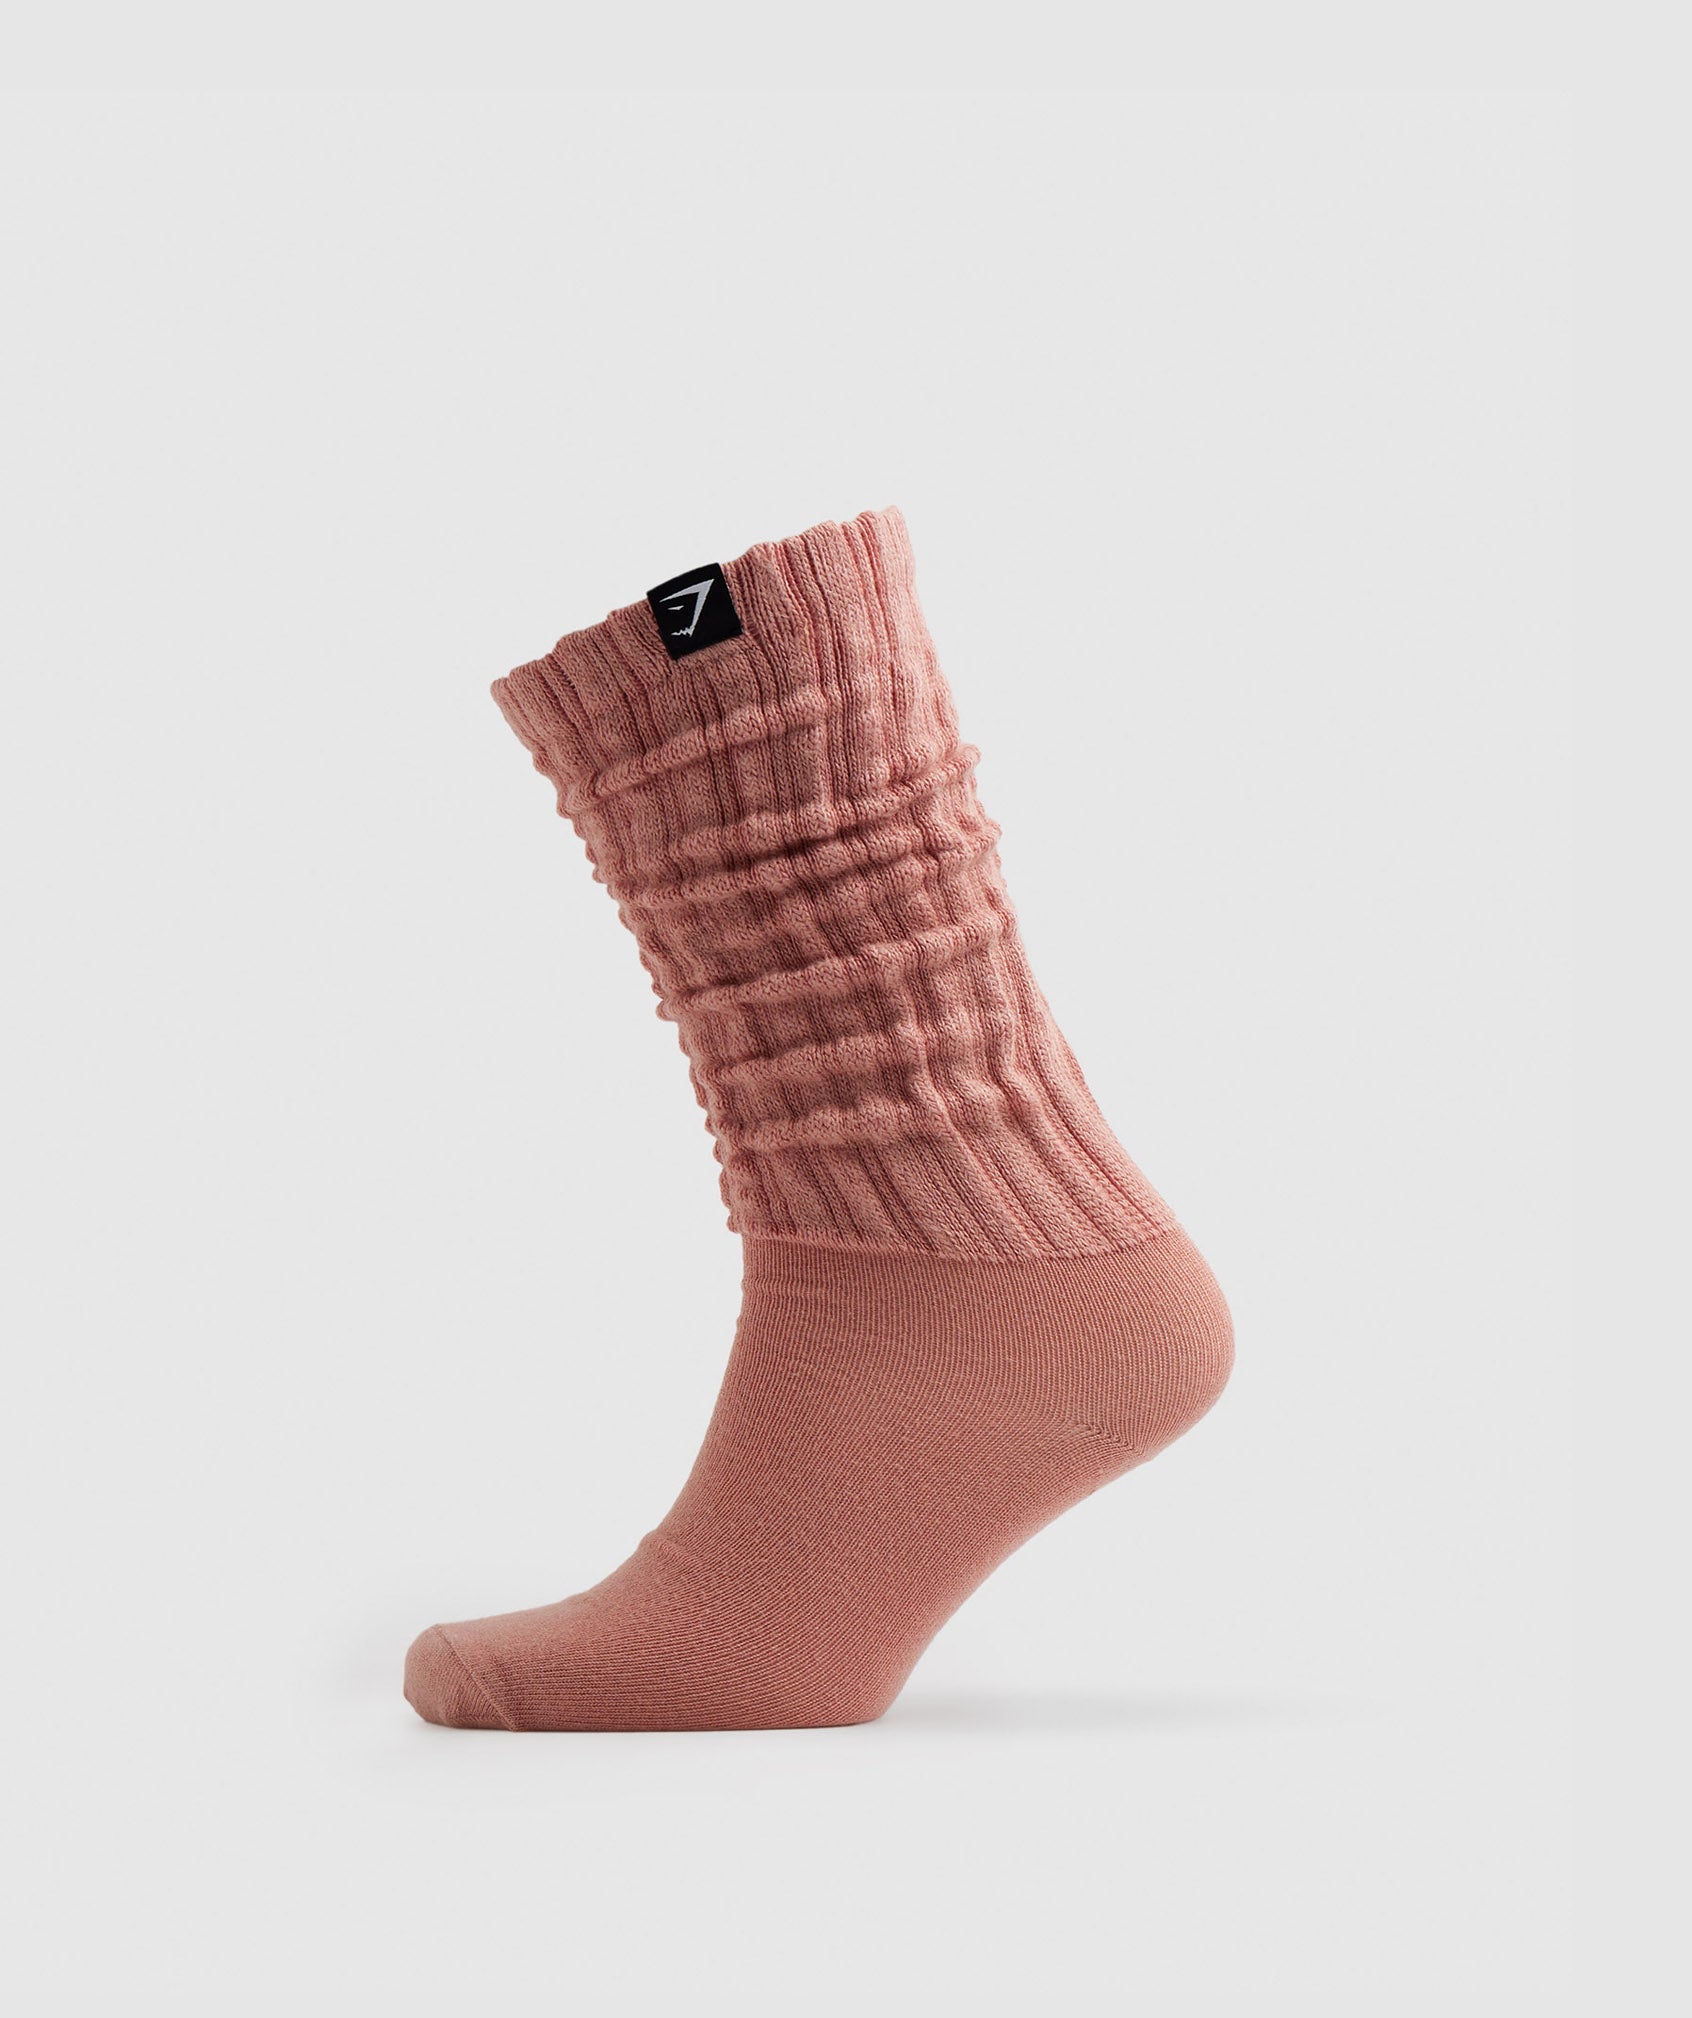 Comfy Rest Day Socks in Hazy Pink - view 1